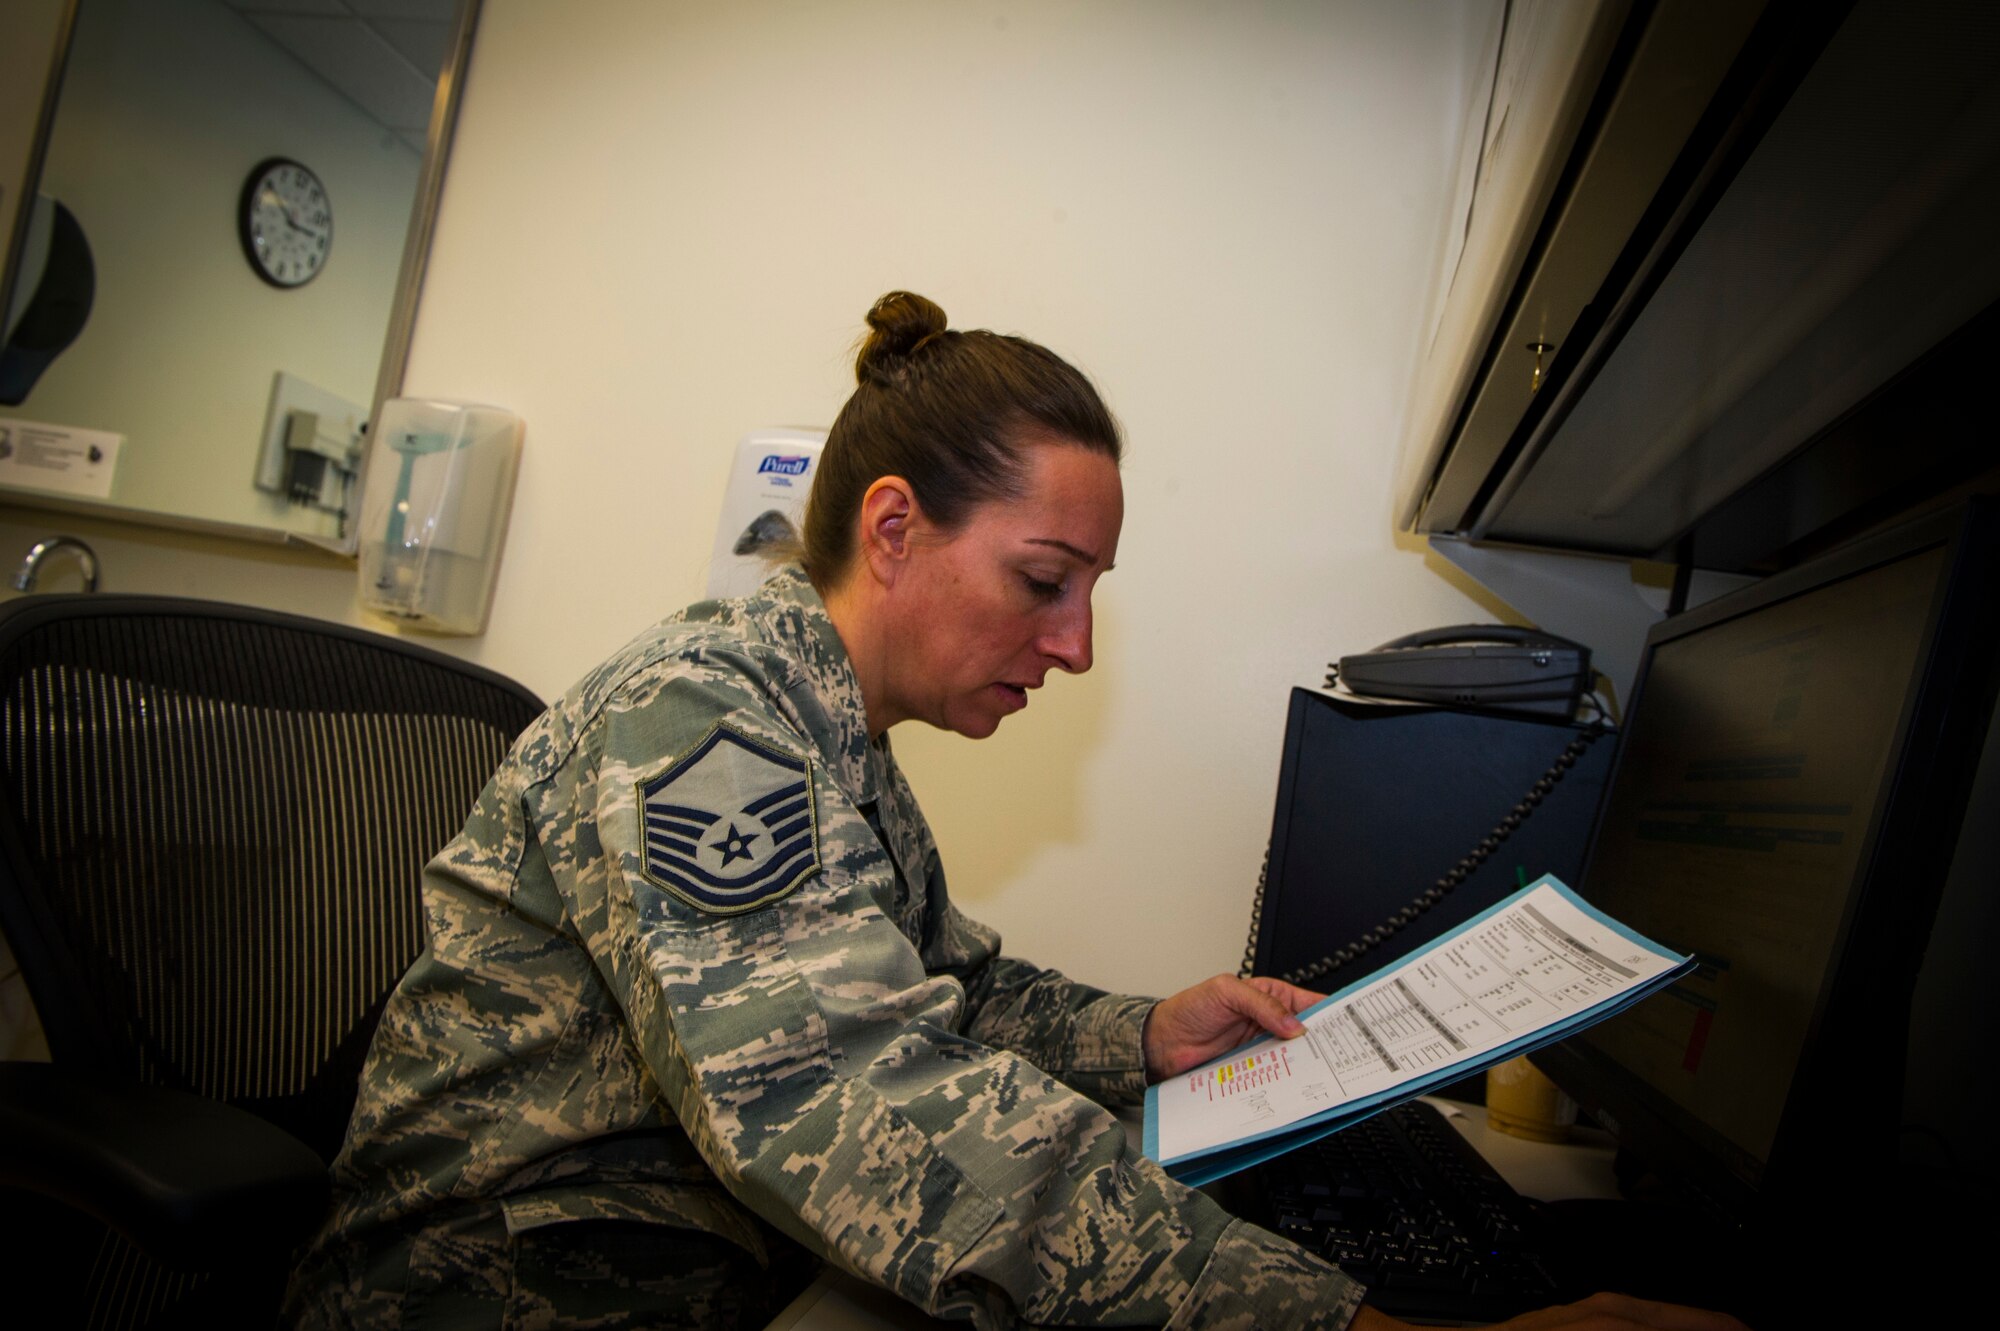 U.S. Air Force Master Sgt. Chrystal Myers, 926th Aerospace Medicine Squadron medical technician, reviews medical records for a patient inside the medical clinic, July 13, 2019 at Nellis Air Force Base, Nev. The 926 AMDS provides direct medical support to Reserve Airmen to maintain operational readiness. (U.S. Air Force photo/Senior Airman Brett Clashman)